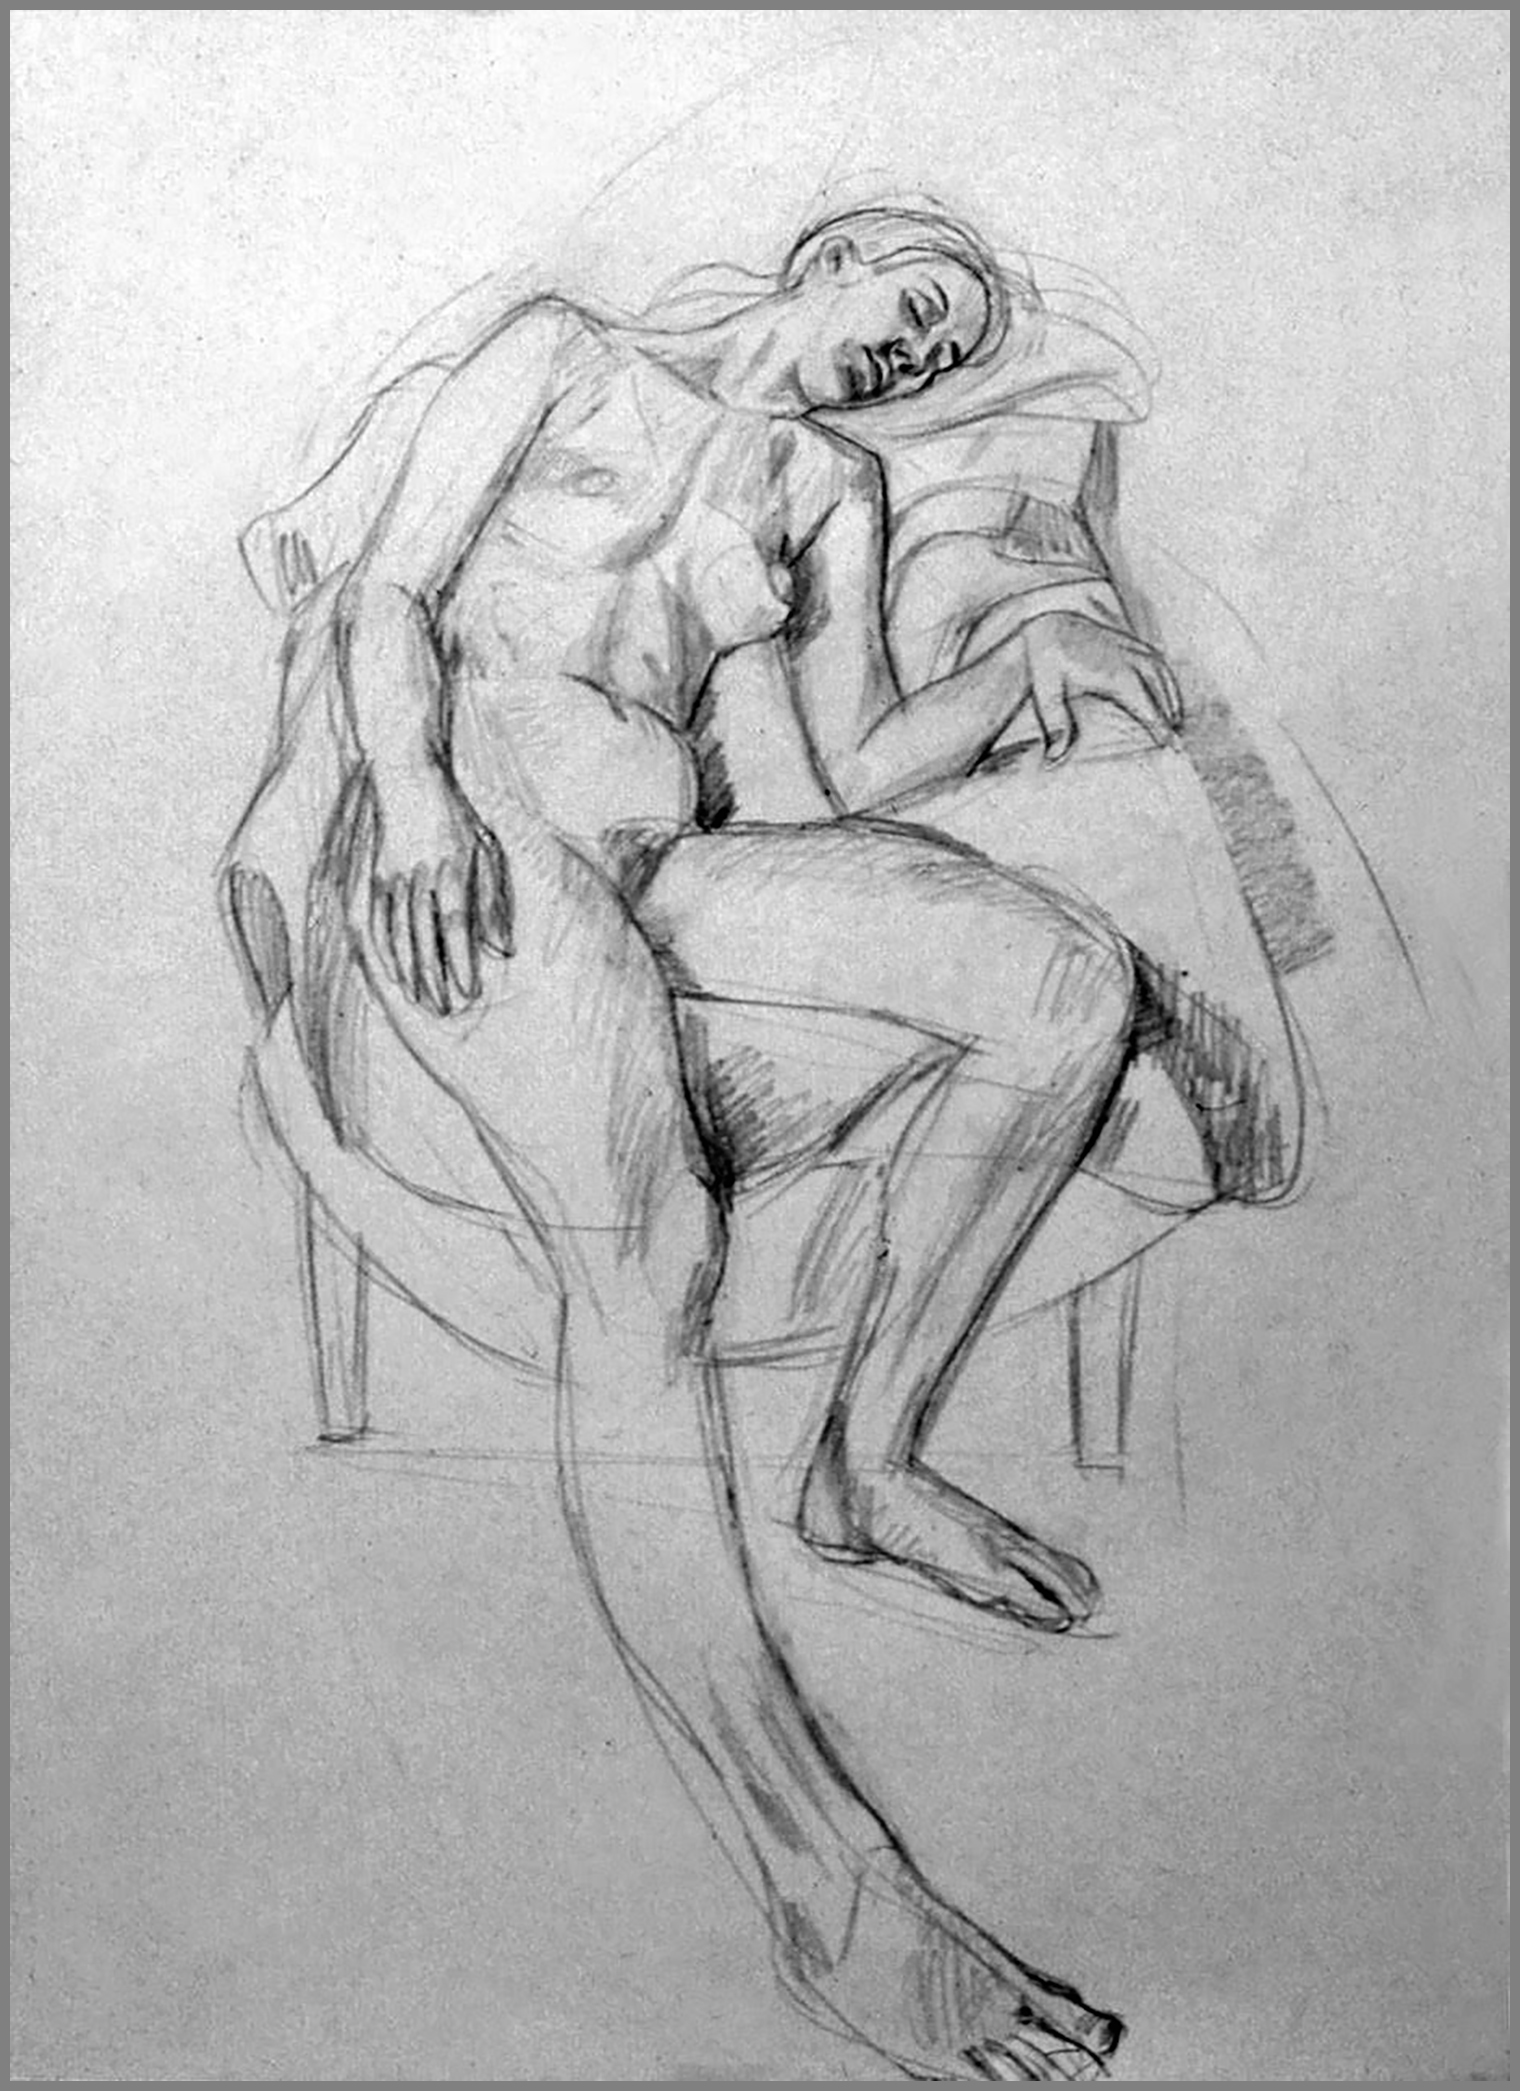  Sleeping Seated Nude, pencil, 24 x 18 inches 